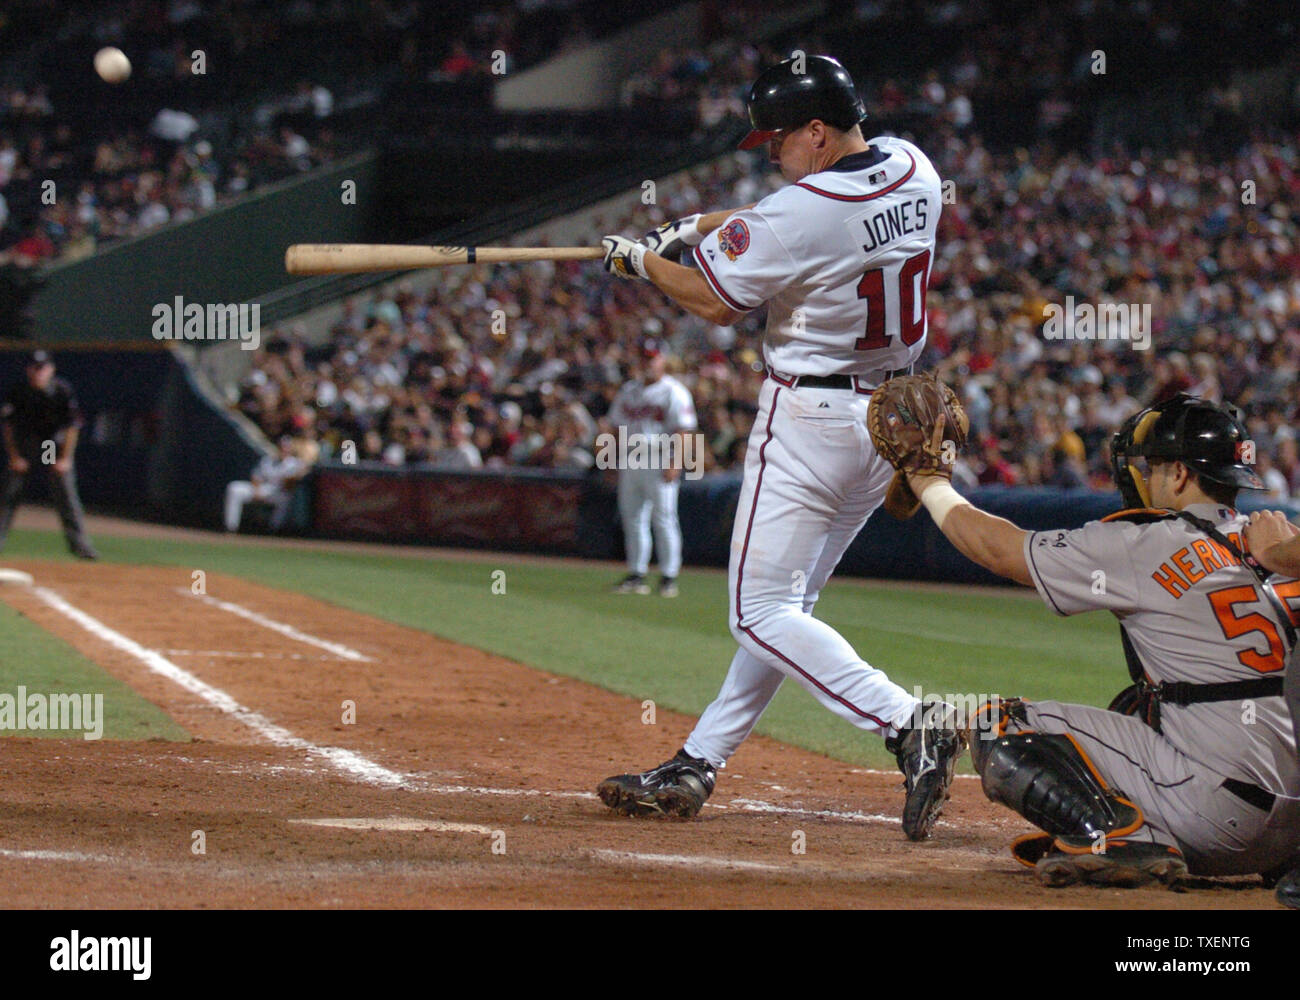 The Braves will retire Chipper Jones' number on June 28 - NBC Sports